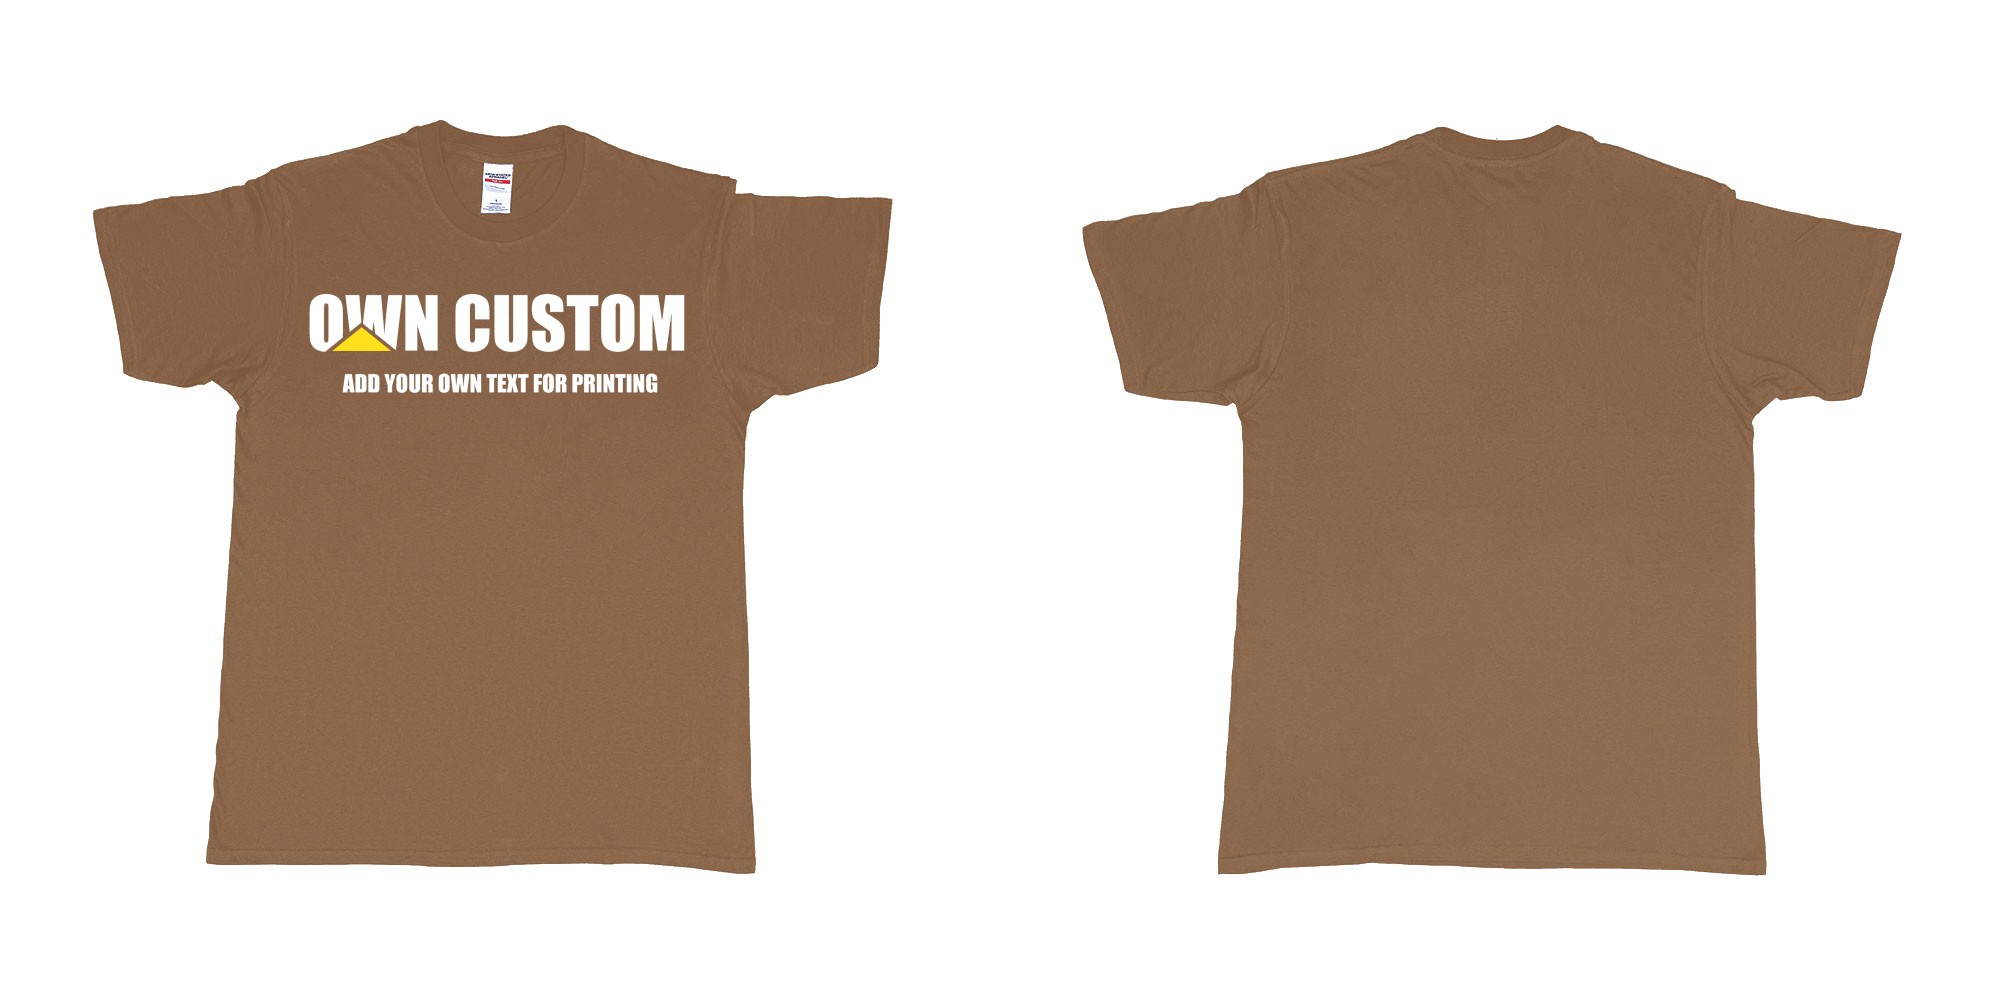 Custom tshirt design caterpillar inc logo custom text printing shirt in fabric color chestnut choice your own text made in Bali by The Pirate Way